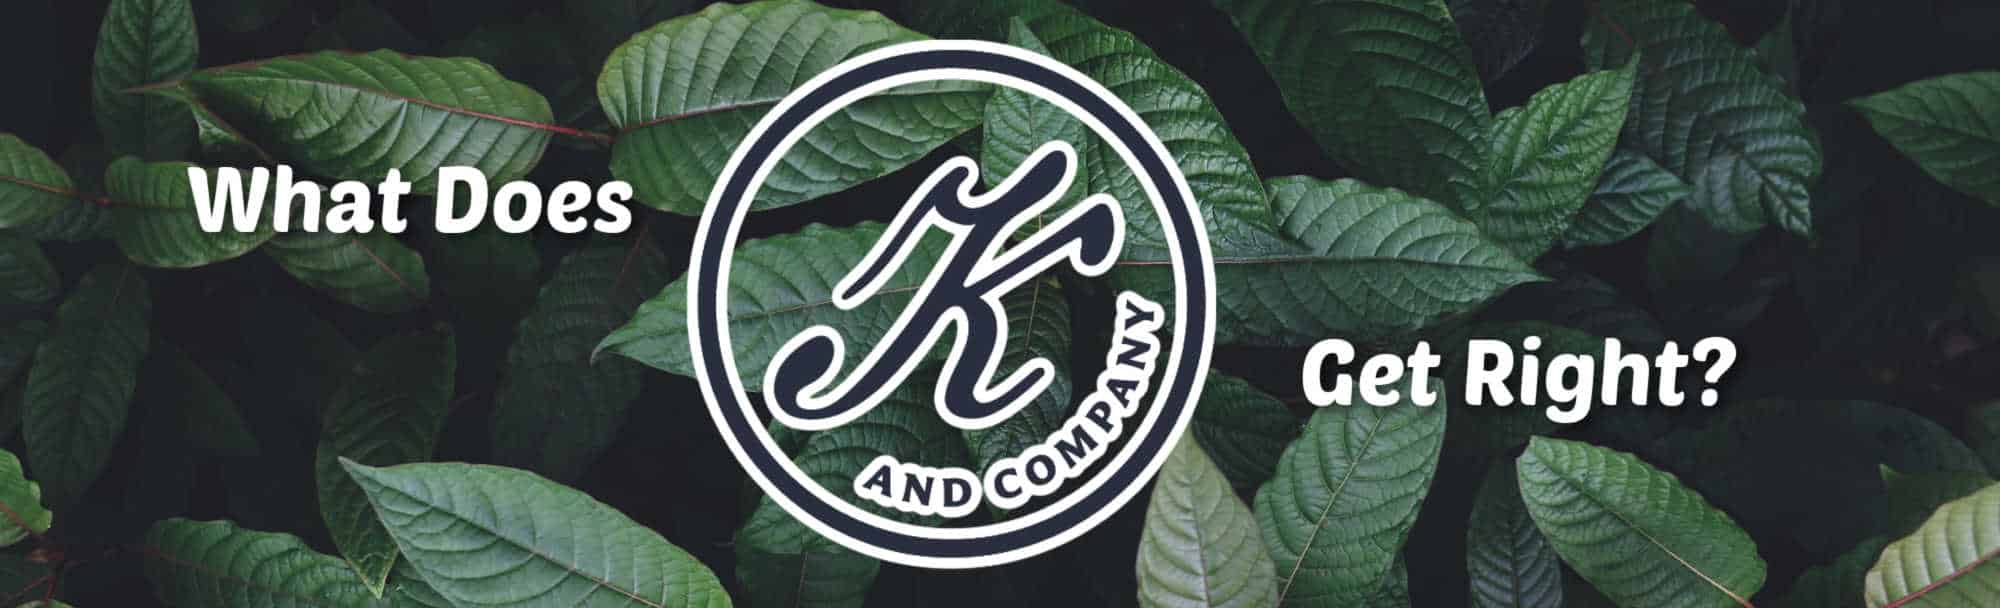 image of what does kratom and company get right